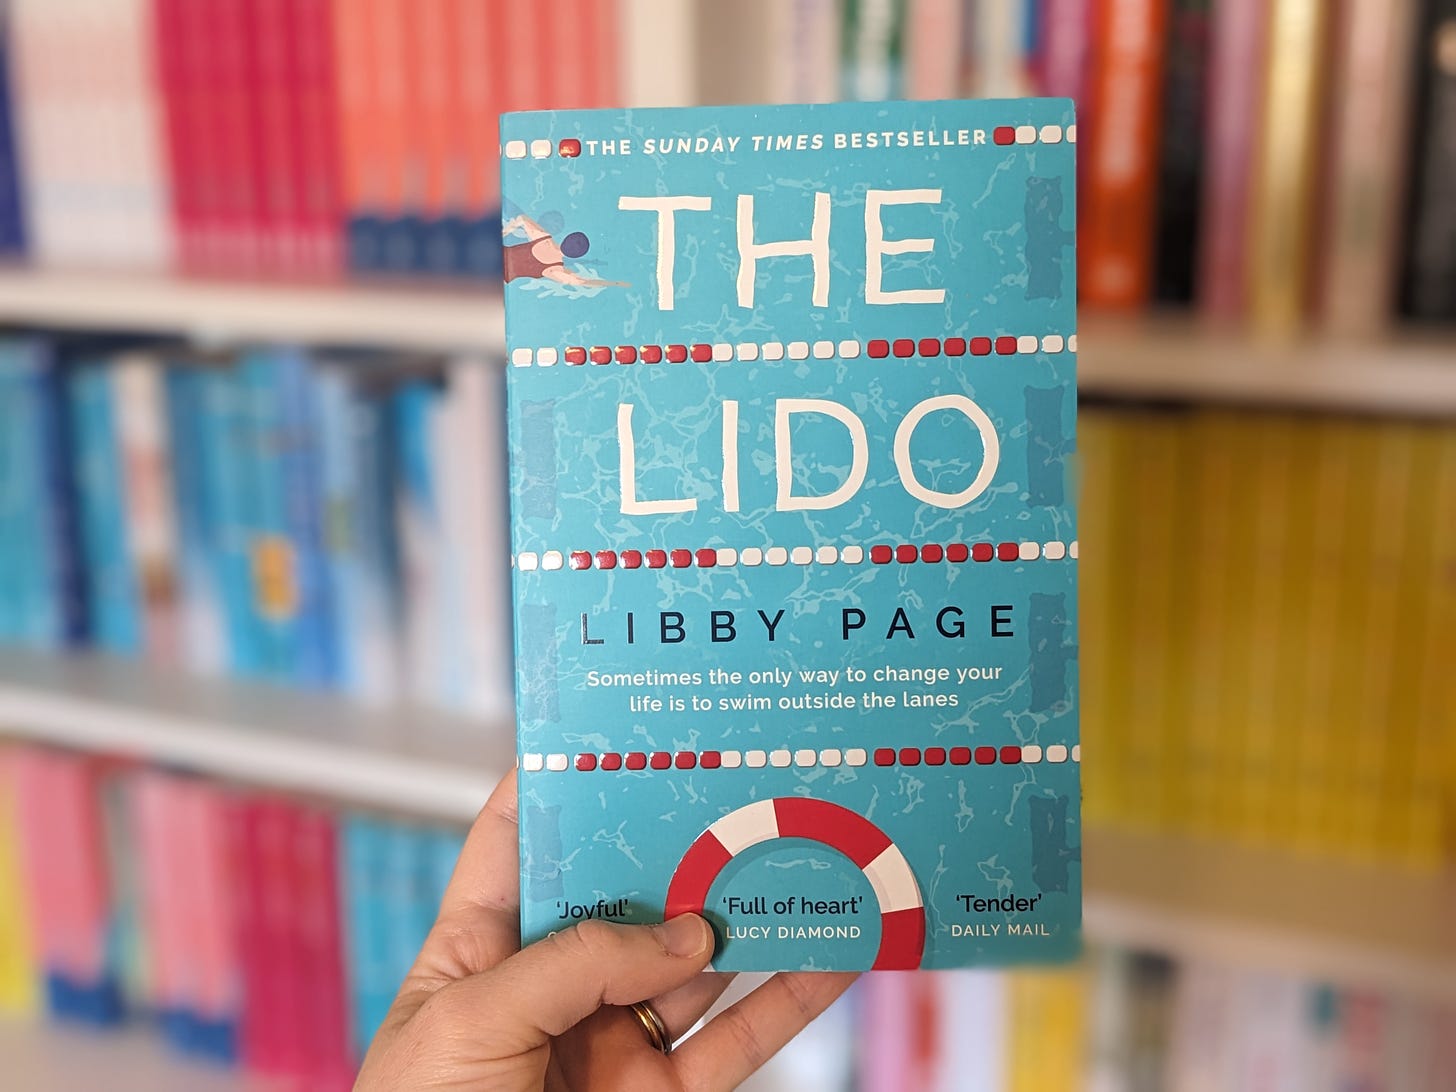 The cover to The Lido by Libby Page shows a birds eye view of a pool with a swimmer, including ropes and a life ring.